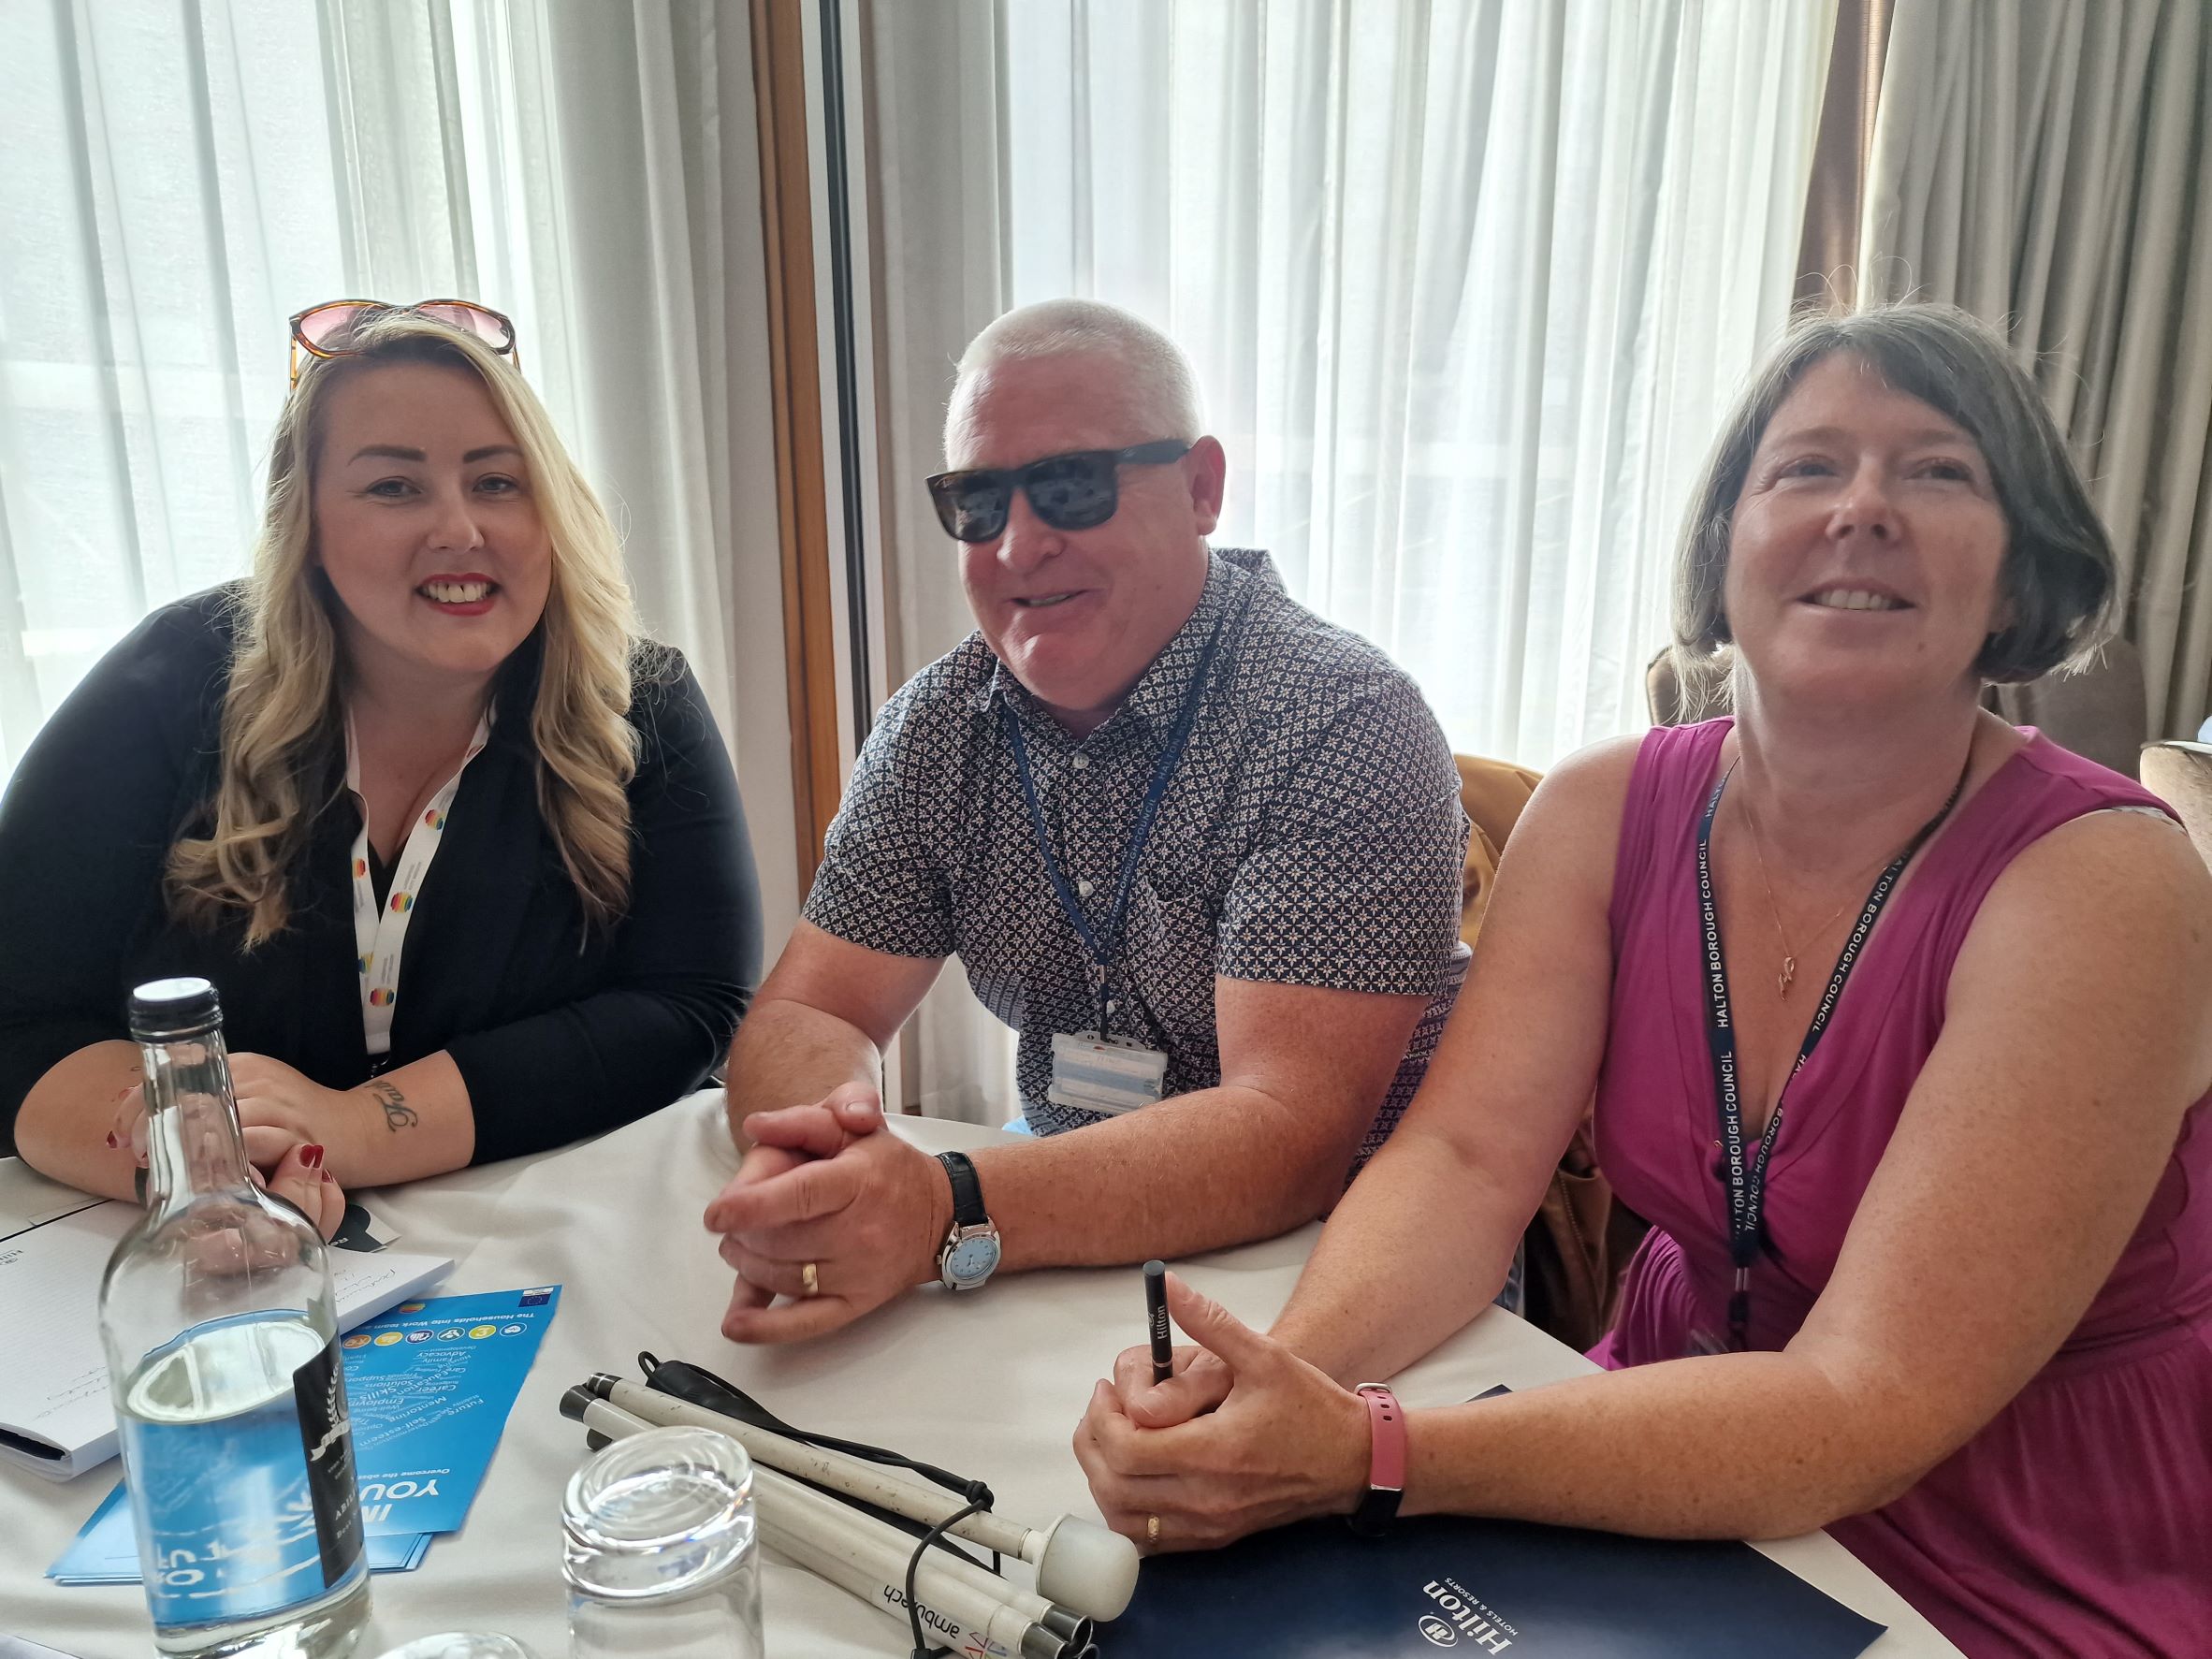 Three delegates sat on a table discussing issues related to blind and partially sighted people. They are looking at the camera and smiling. A folded white cane is on the table.